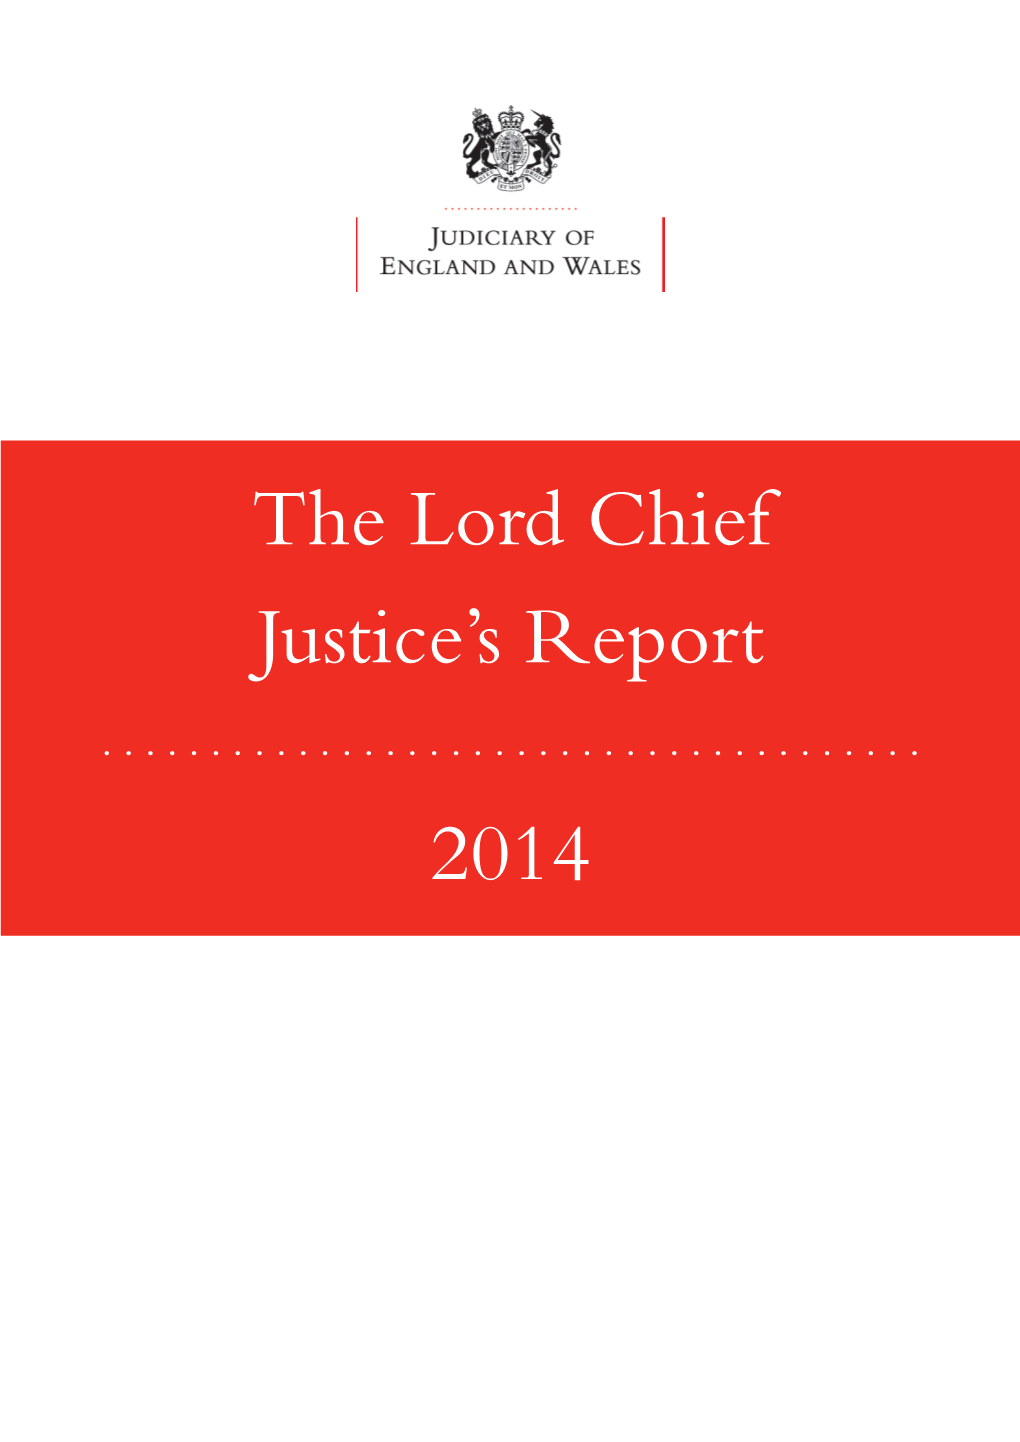 The Lord Chief Justice's Report 2014